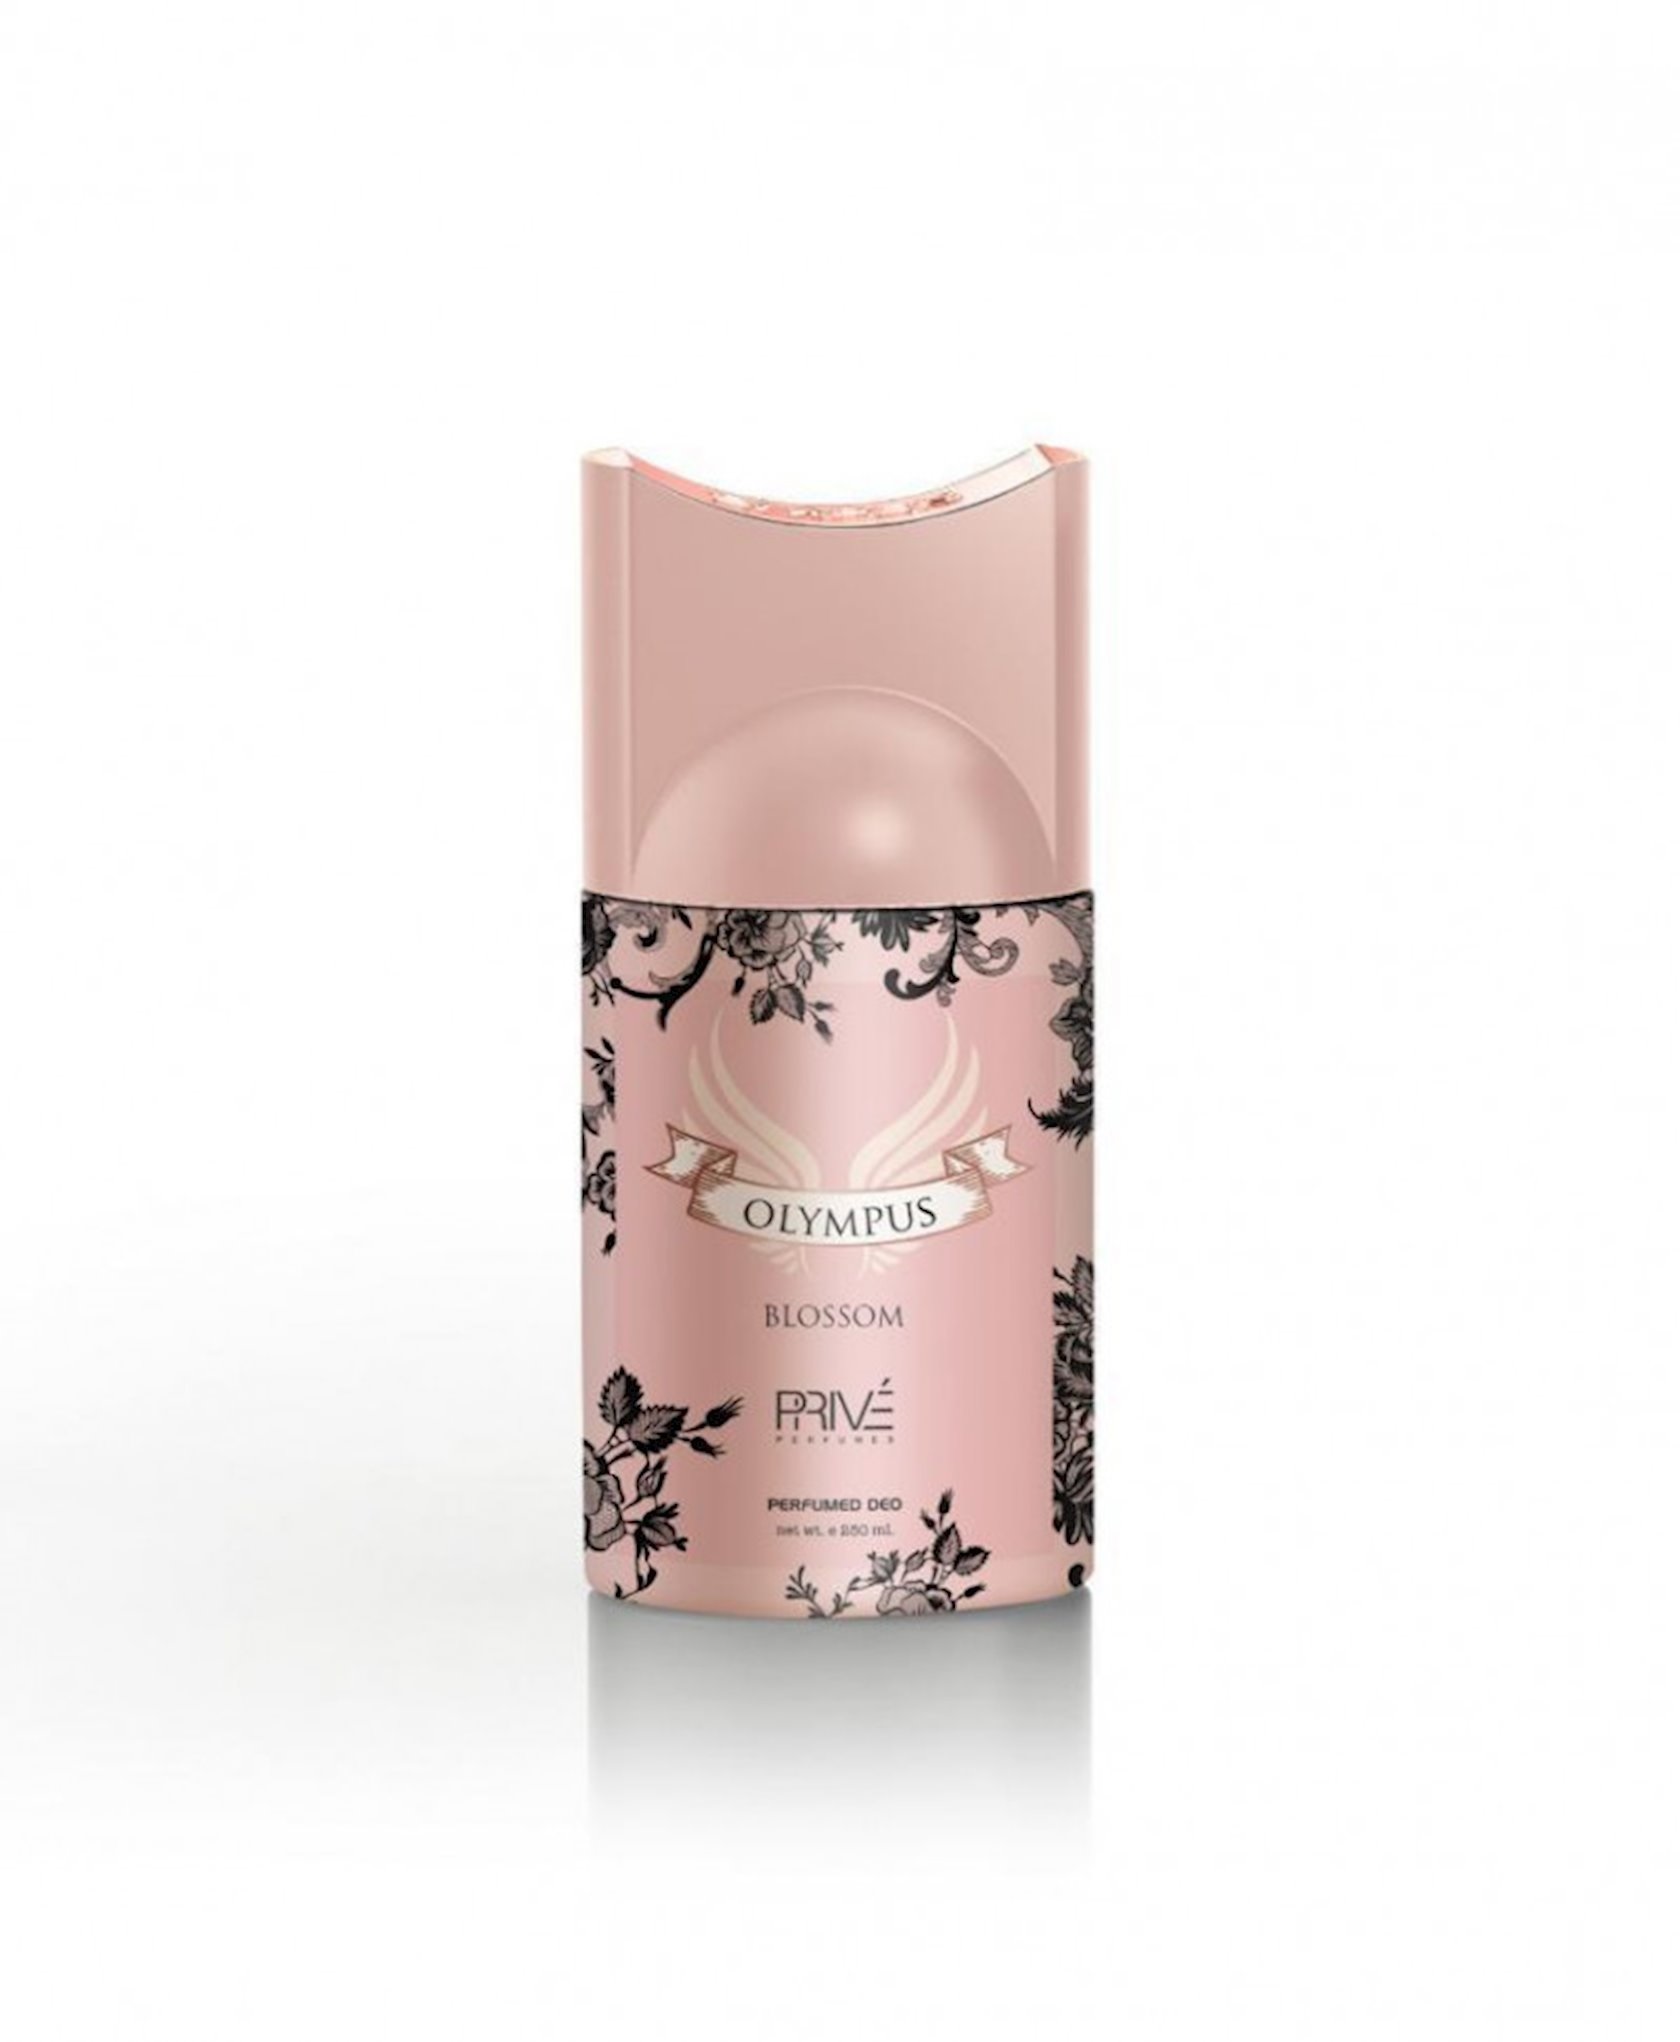 Prive Olympus Blossom Deo